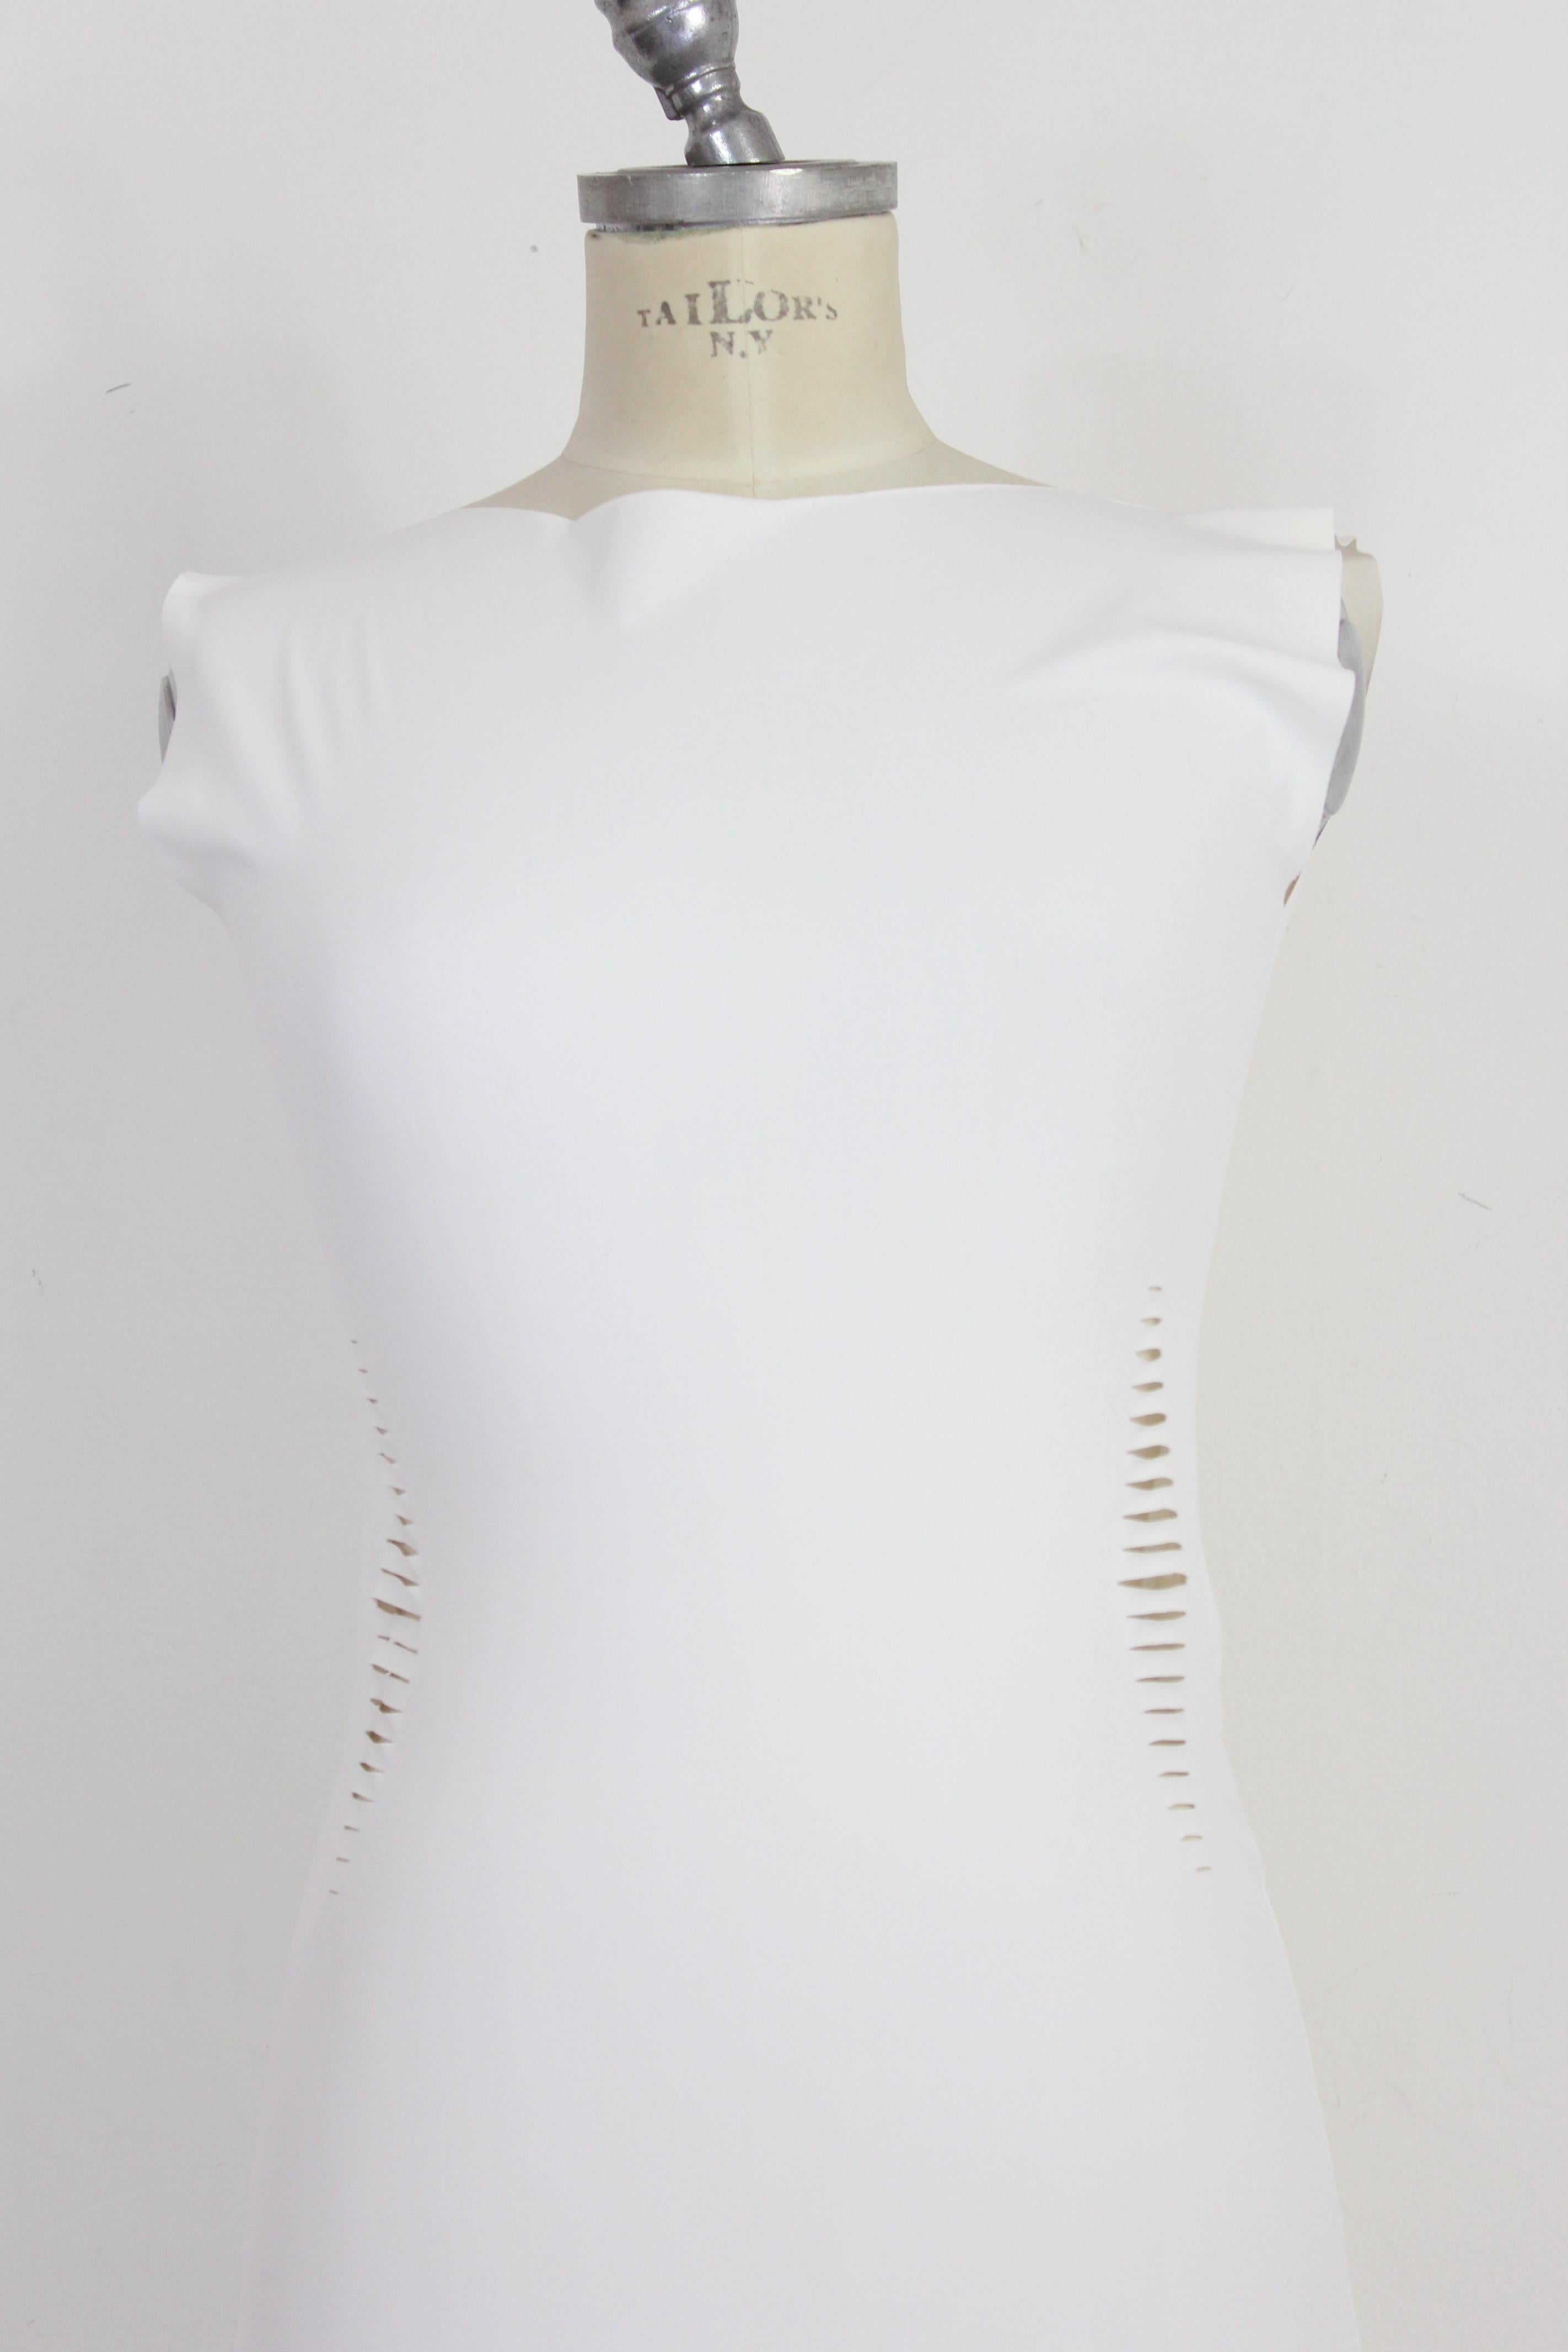 Cavalli Freedom 2000s woman dress. Fitted sheath dress, white, transparent. Laser cut all over the dress. Fabric 72% polyamide 28% elastane. Made in Italy. In the photos a card has been inserted to show the fit of the dress at its best.

Condition: